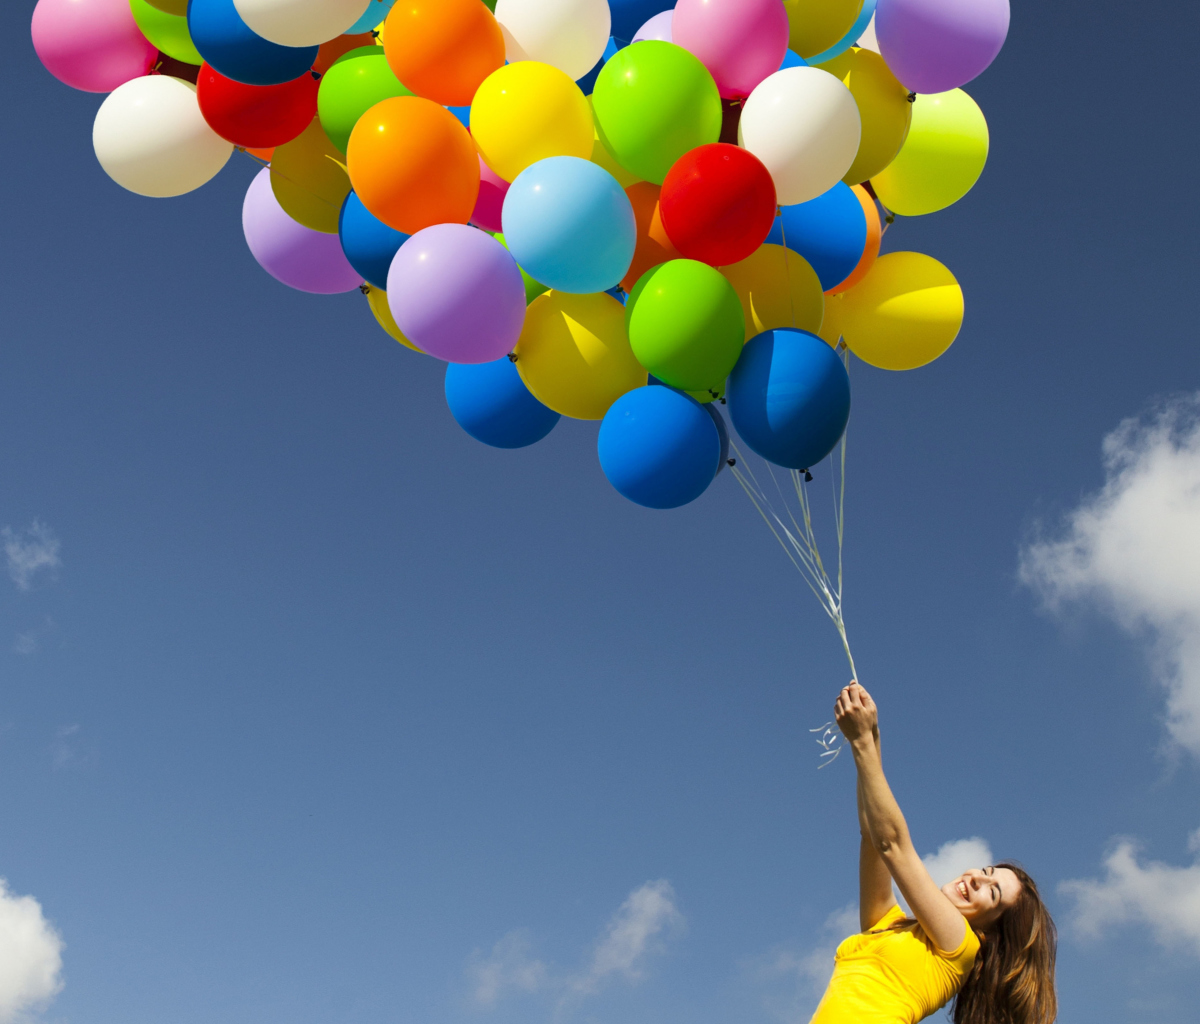 Girl With Balloons wallpaper 1200x1024